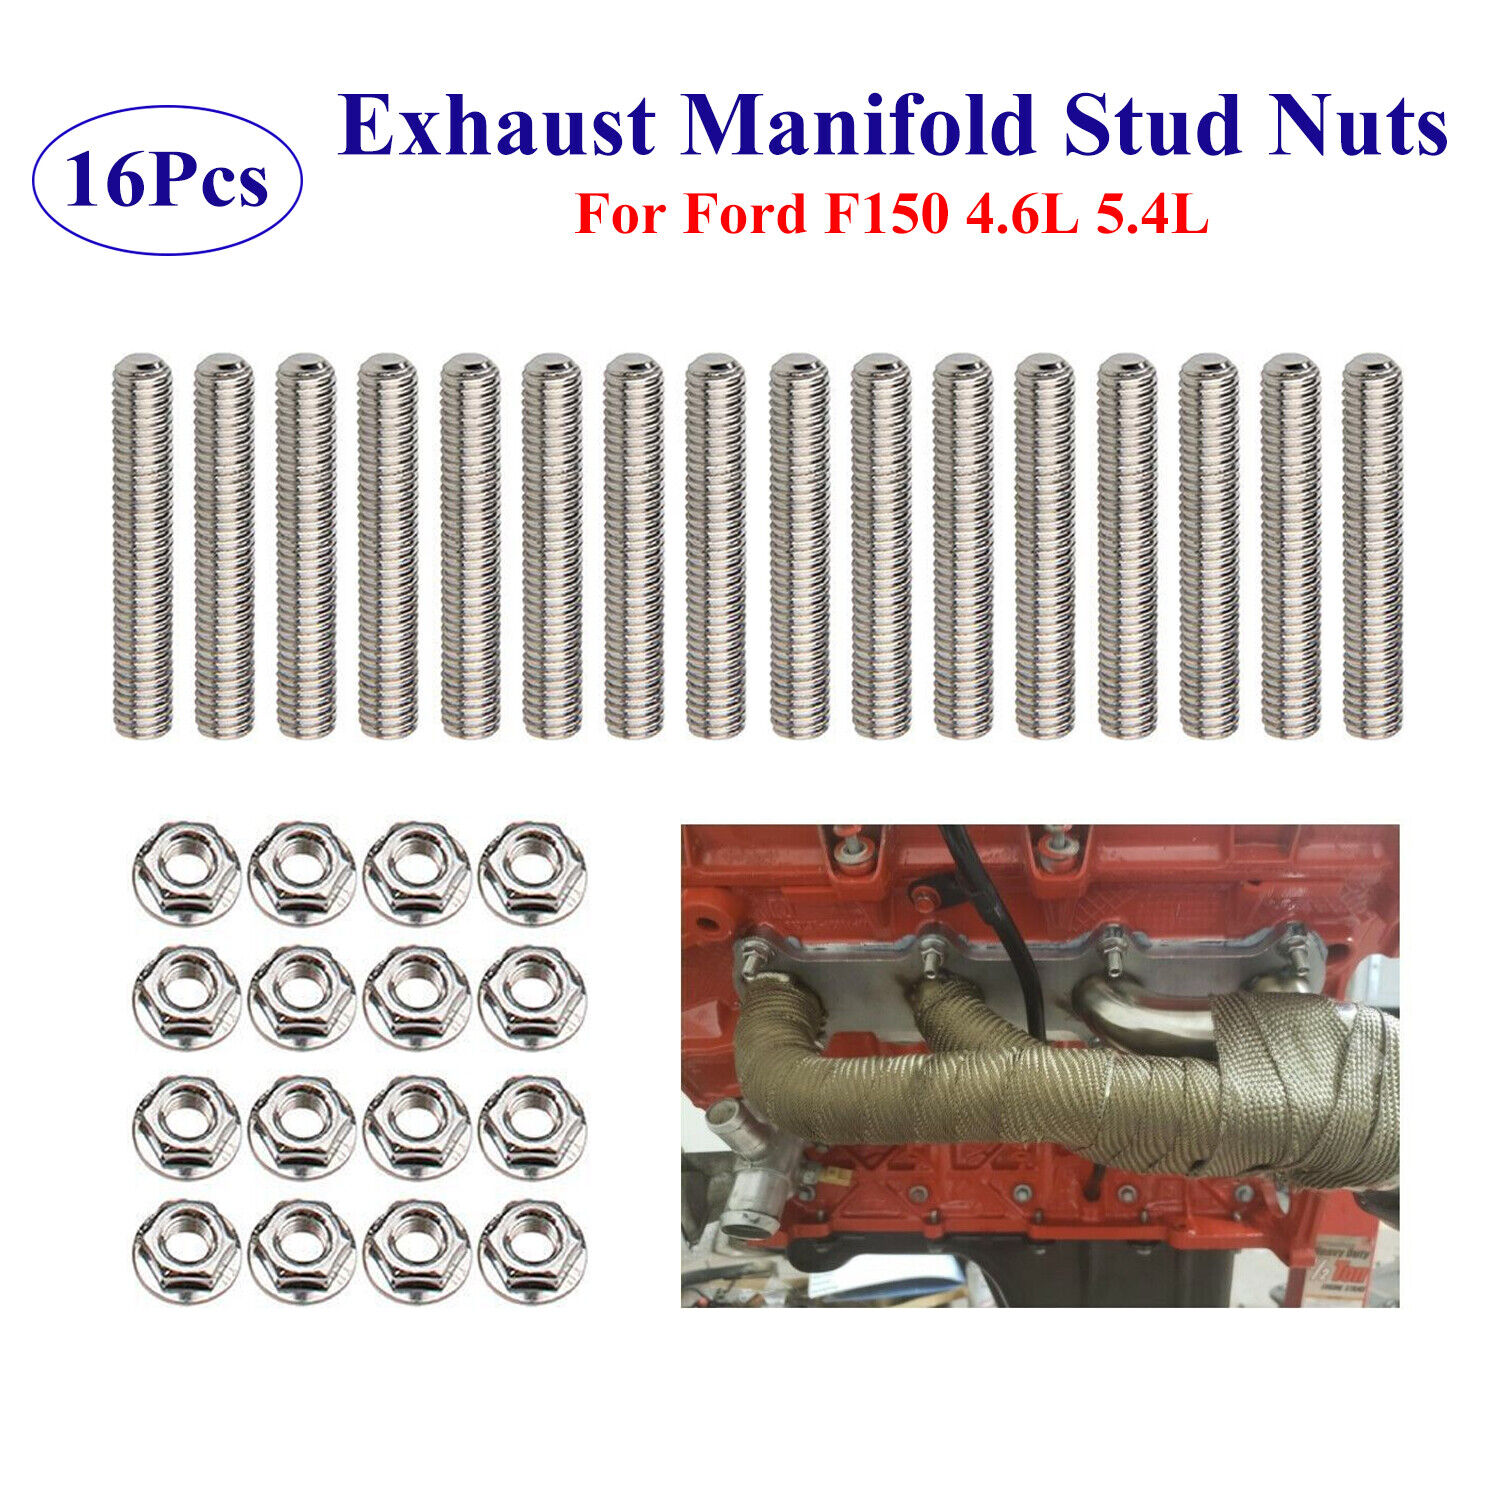 Exhaust Manifold Header Stainless Steel Studs Nuts Bolts For Ford F150 4.6L 5.4L